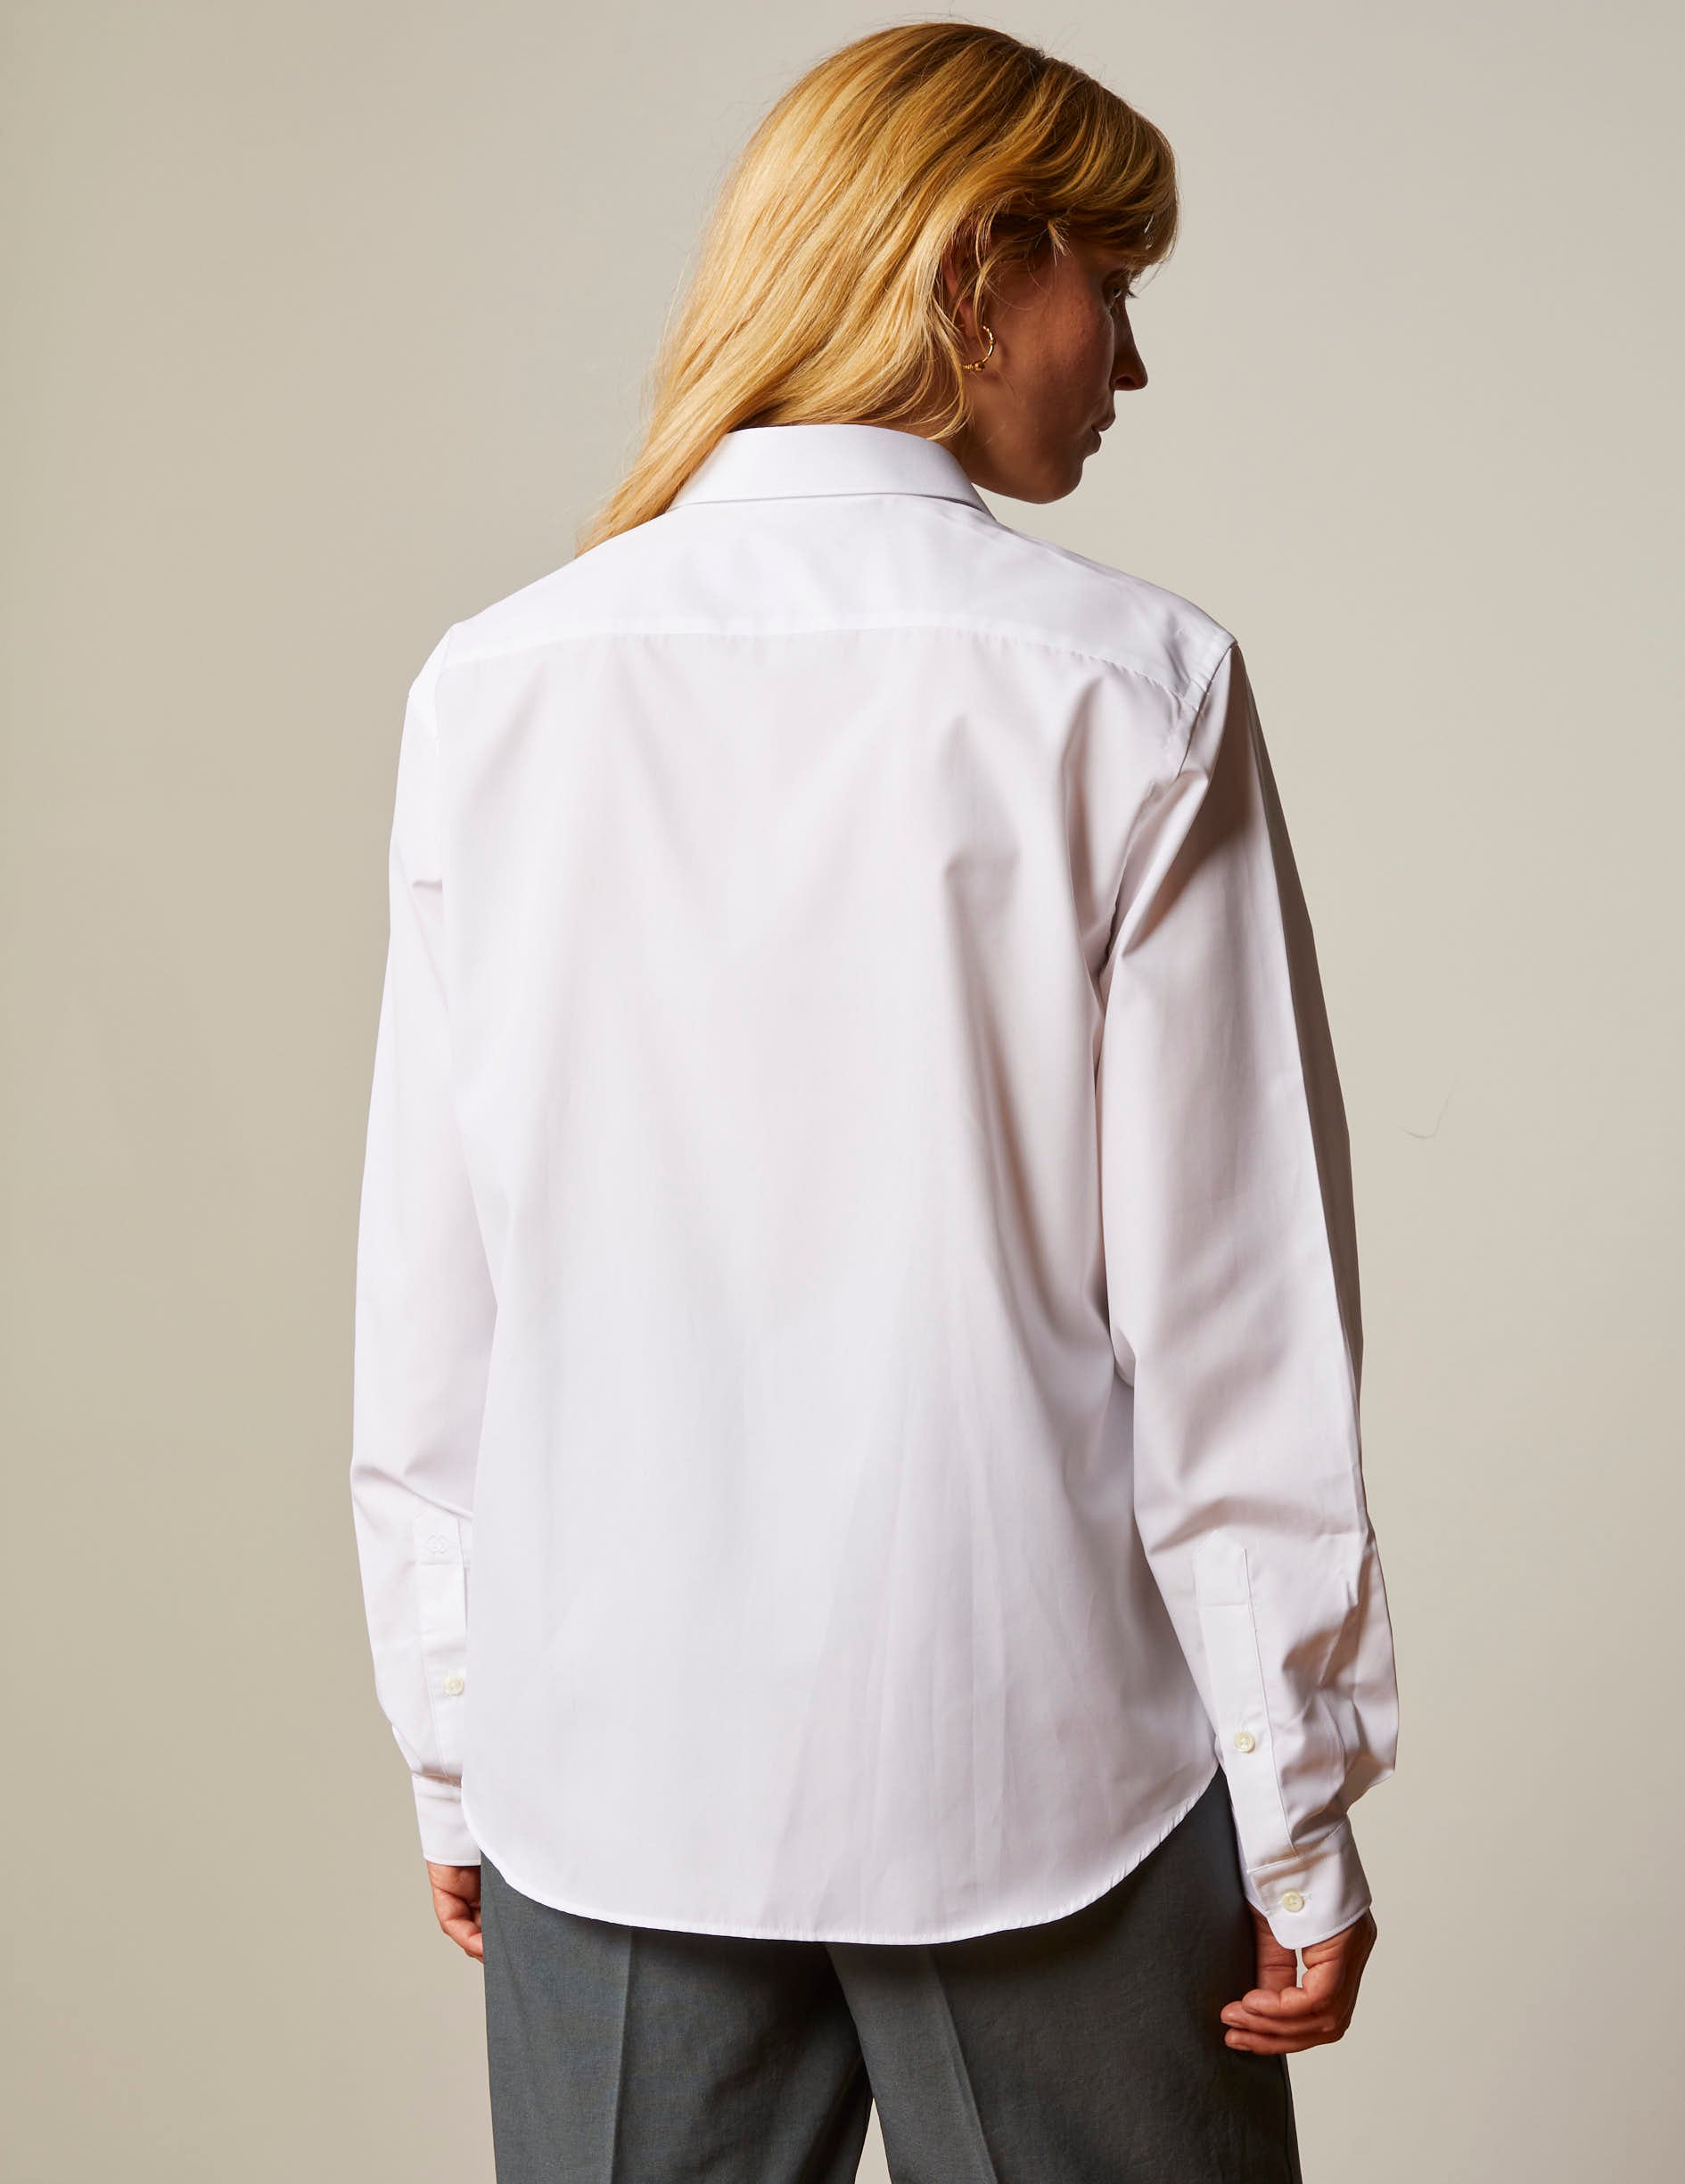 White "Je t'aime" shirt with grey embroidery - Poplin - Figaret Collar